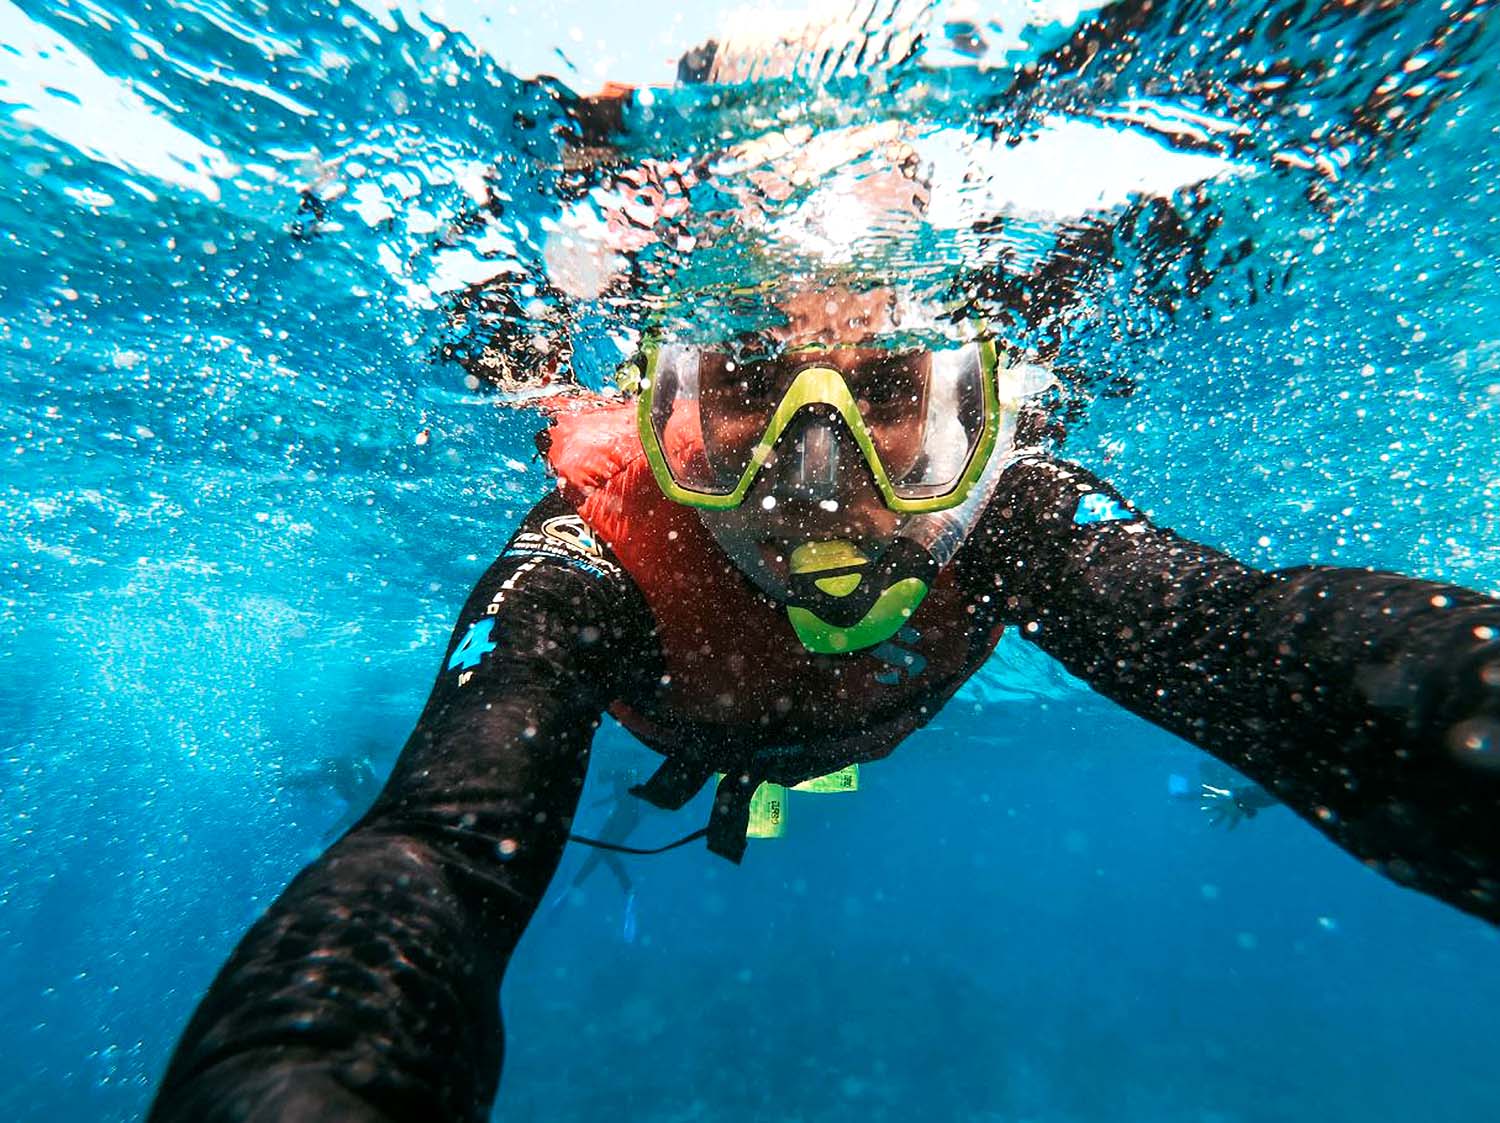 Snorkle in Turquoise Waters